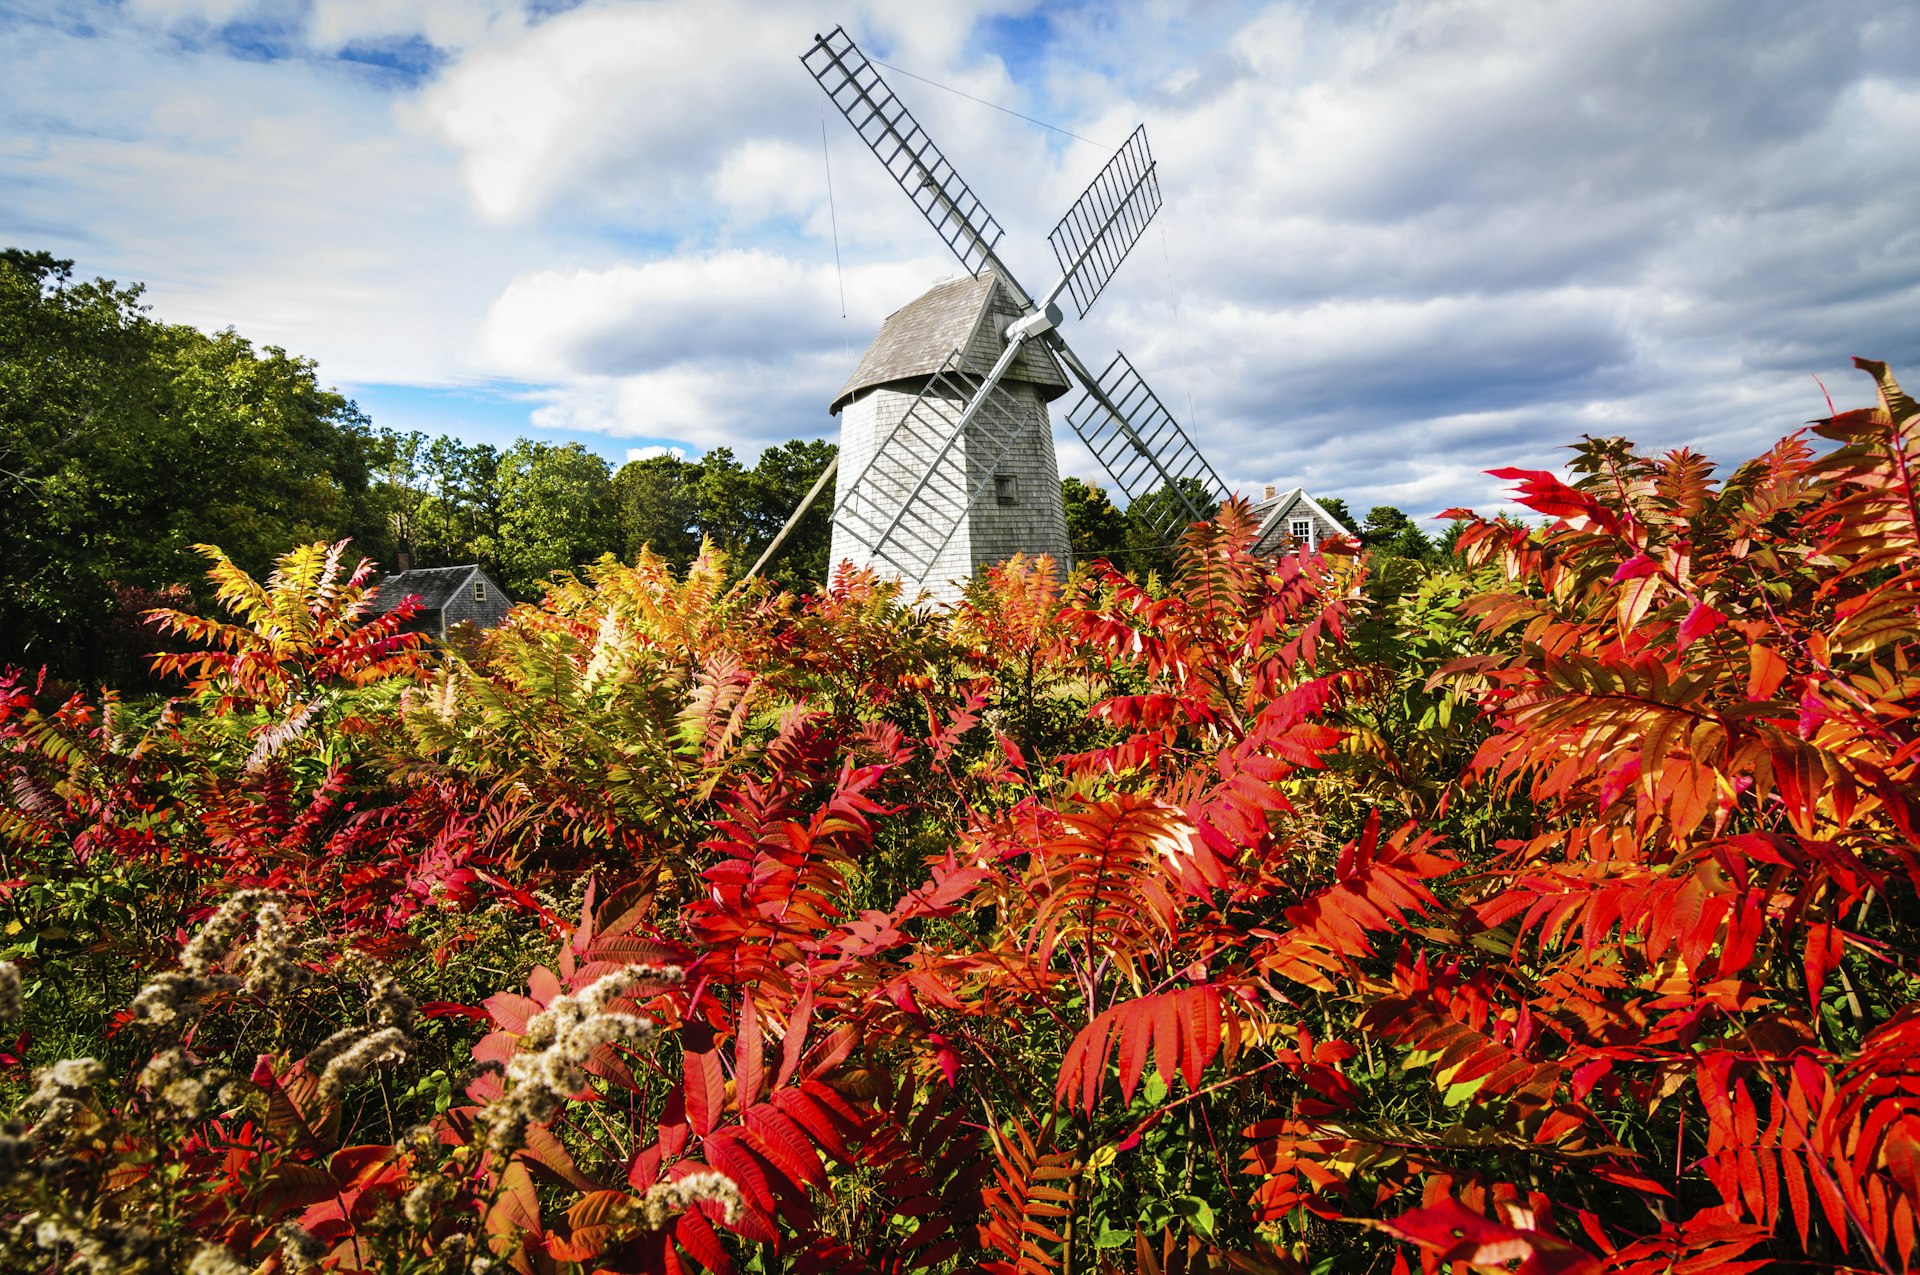 Brilliant red sumac leaves in the field in front of the Higgins Farm Windmill in Brewster, Massachusetts